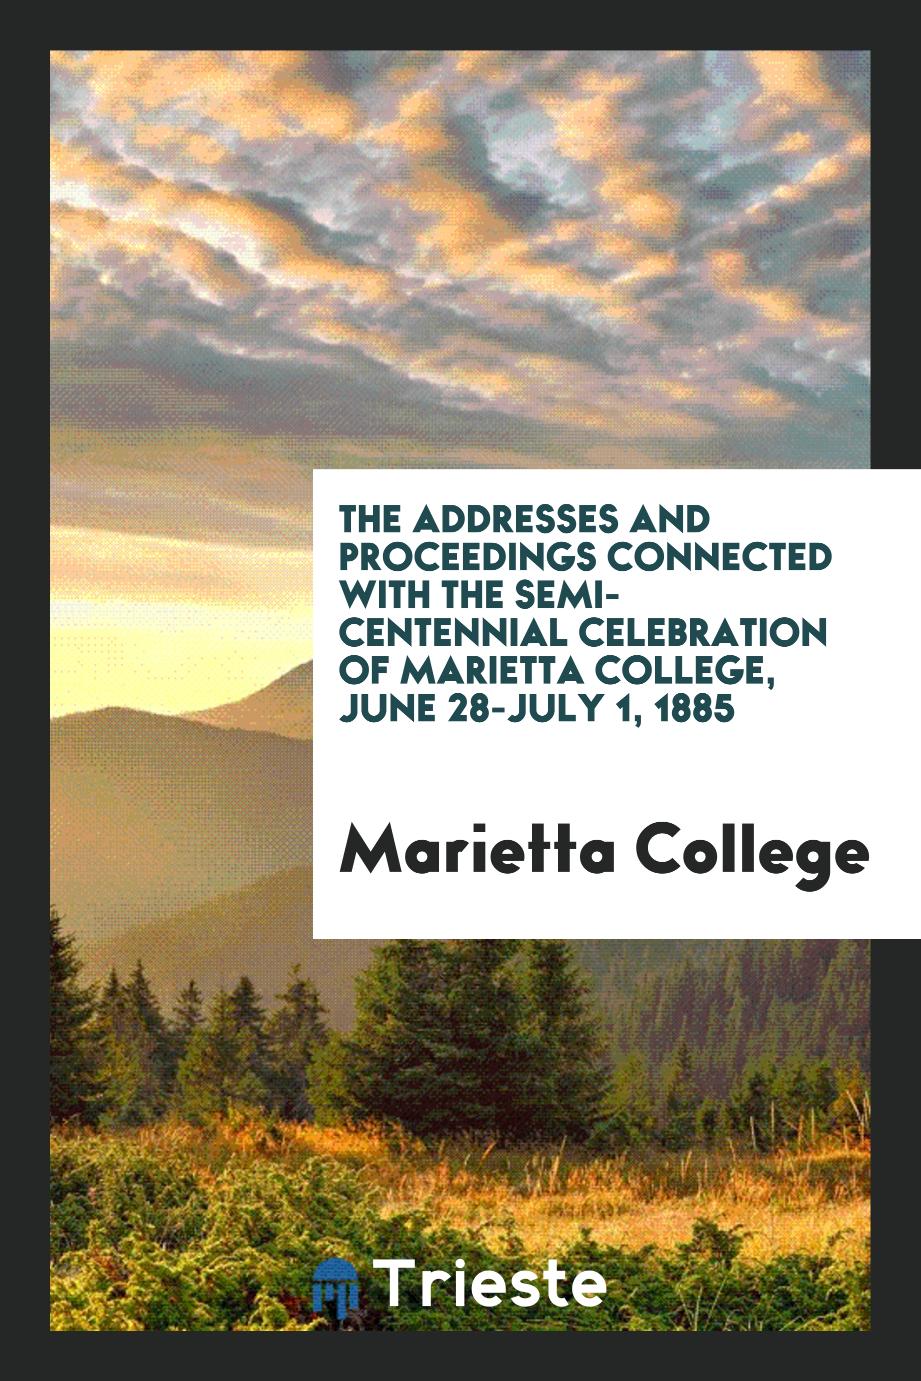 The addresses and proceedings connected with the semi-centennial celebration of Marietta College, June 28-July 1, 1885